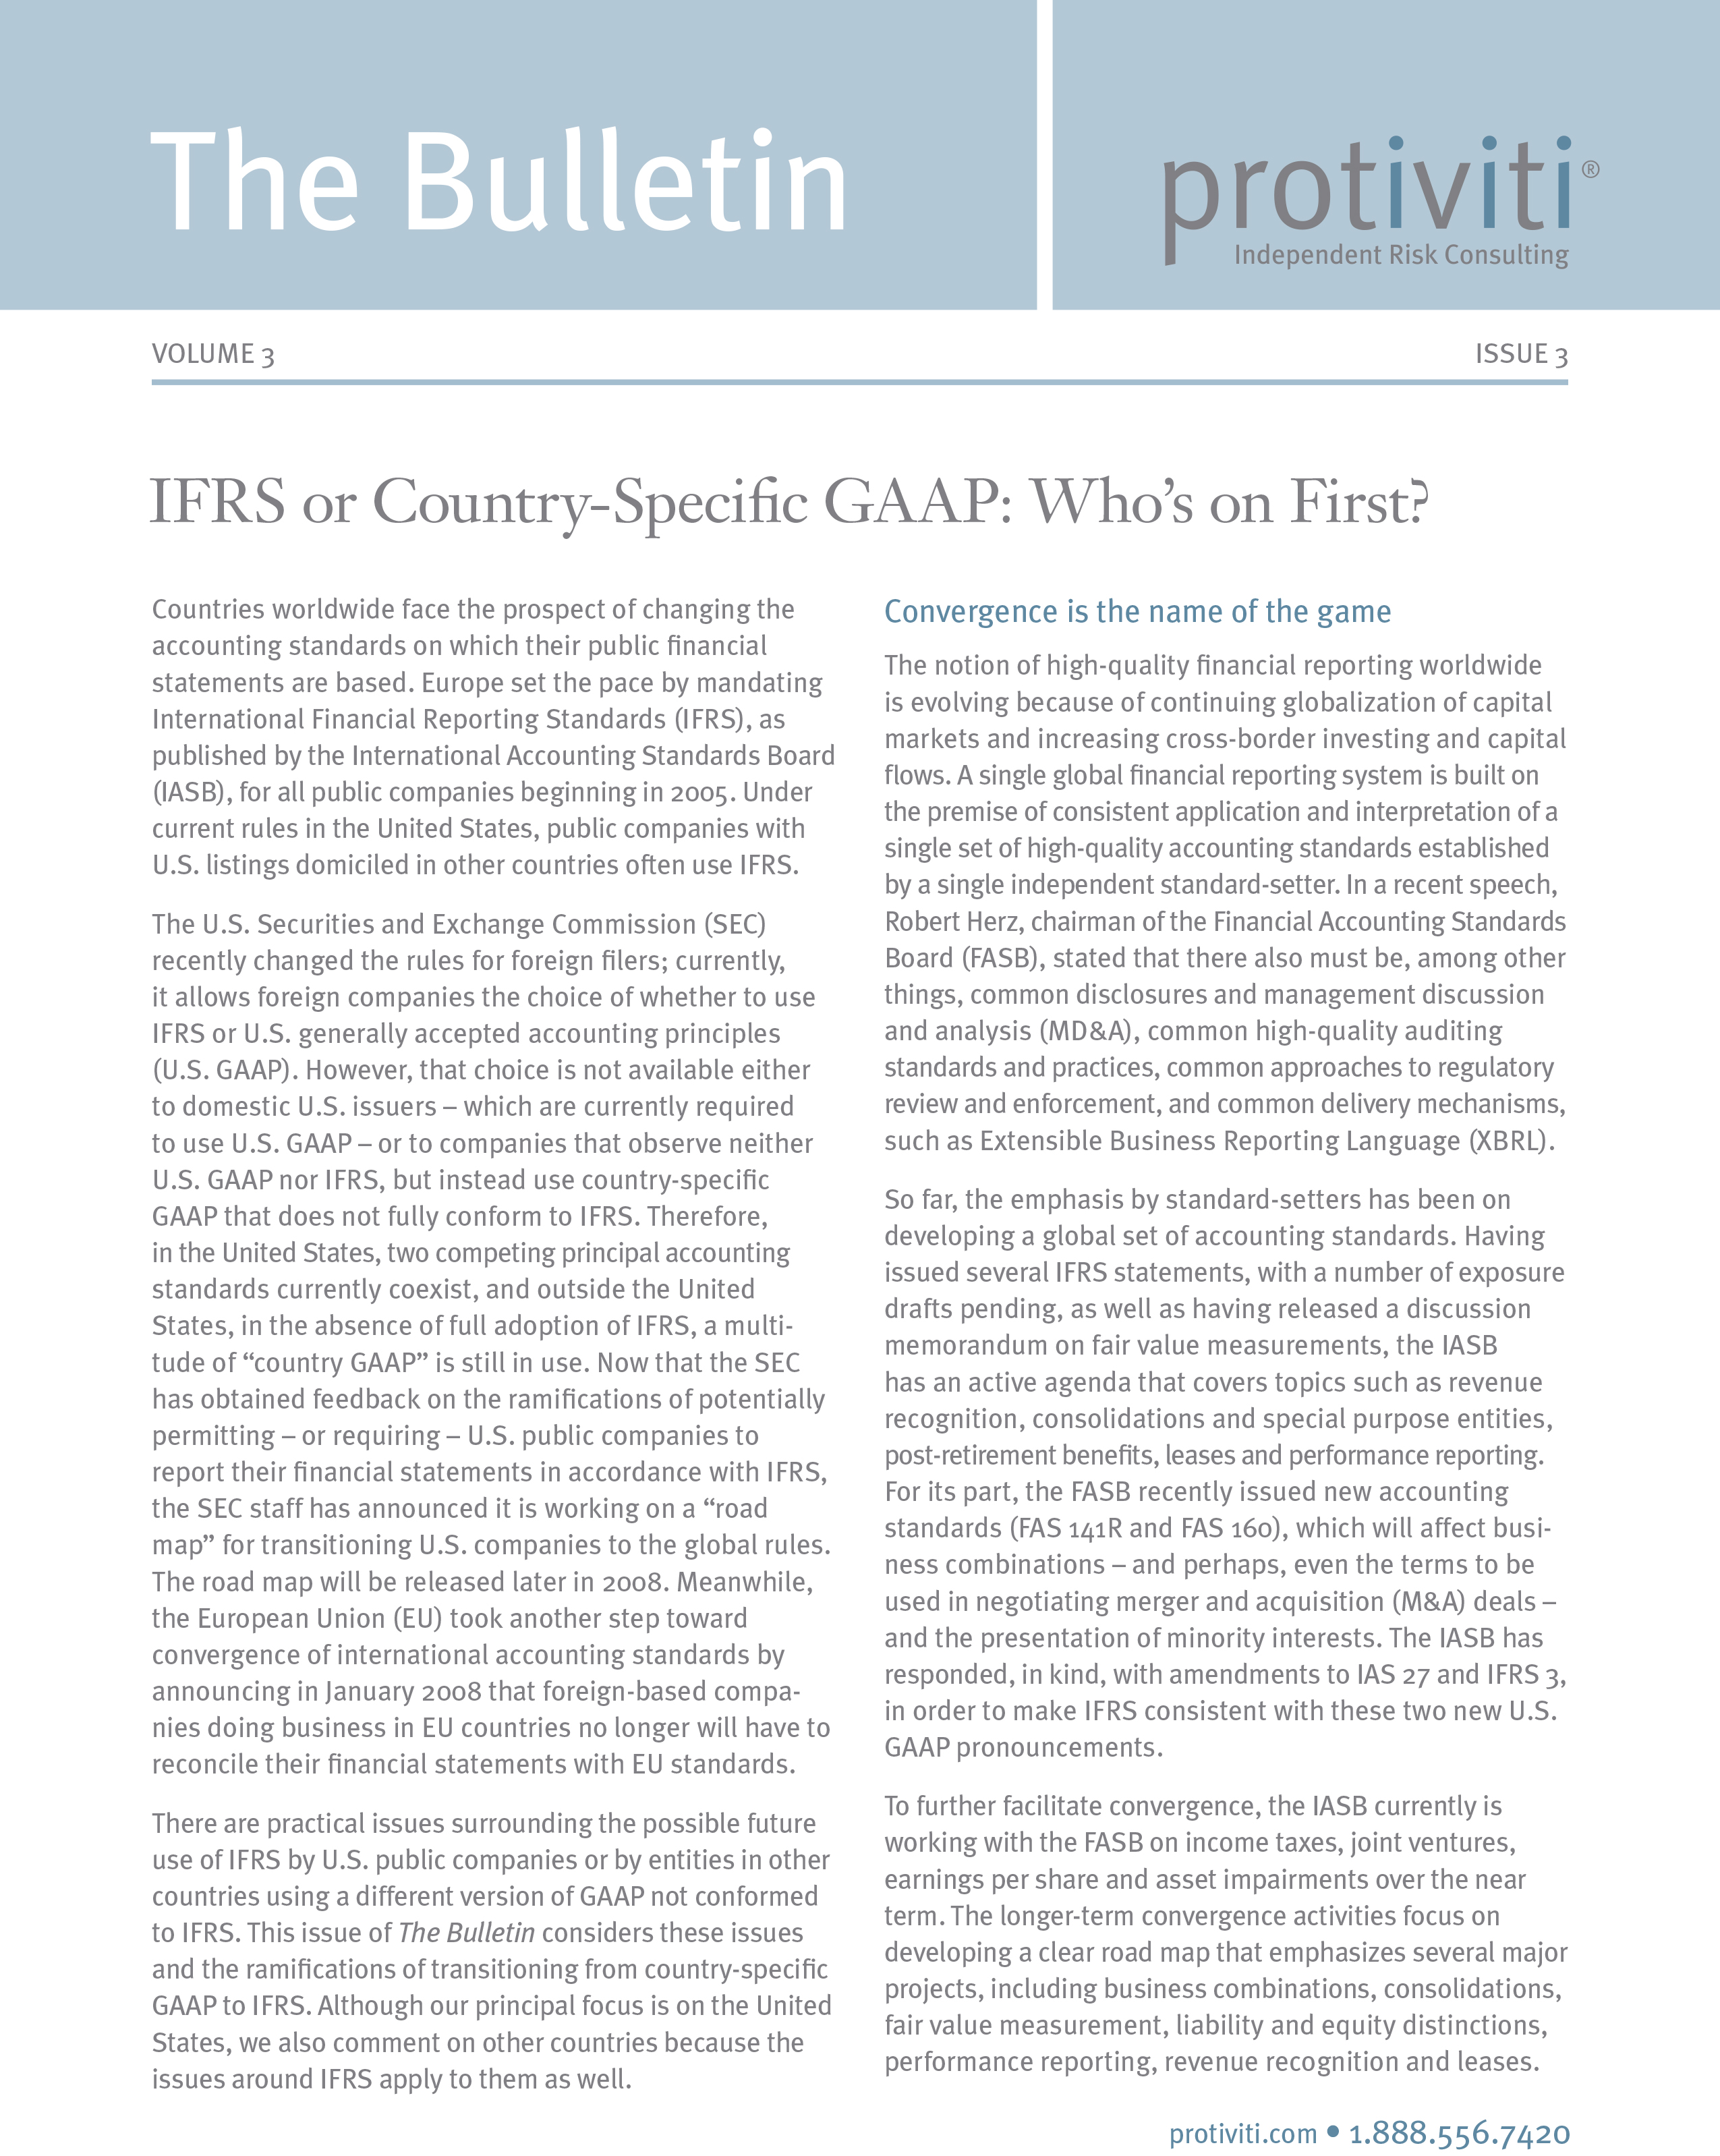 Screenshot of the first page of IFRS or Country-Specific GAAP-Who’s on First